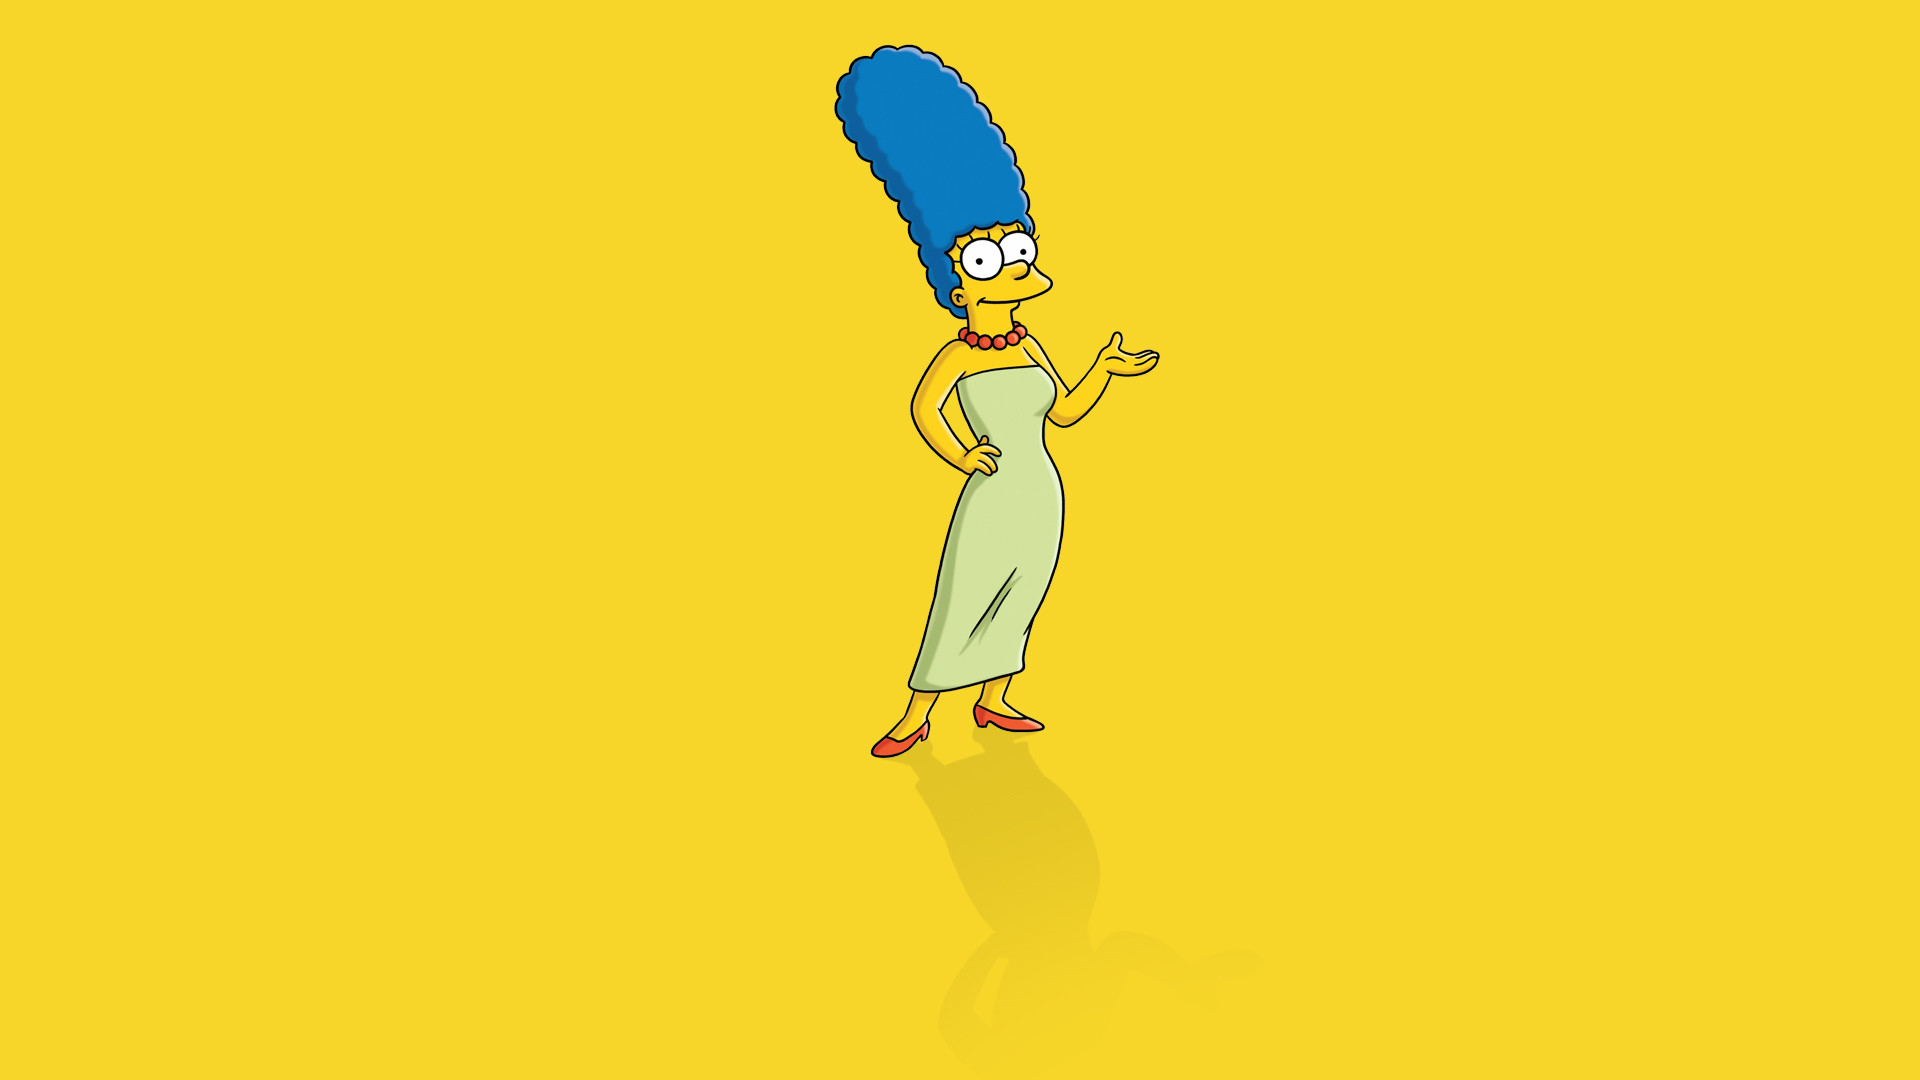 1920x1080 ... The Simpsons Wallpapers, Computer The Simpsons Wallpapers, Desktop  Backgrounds